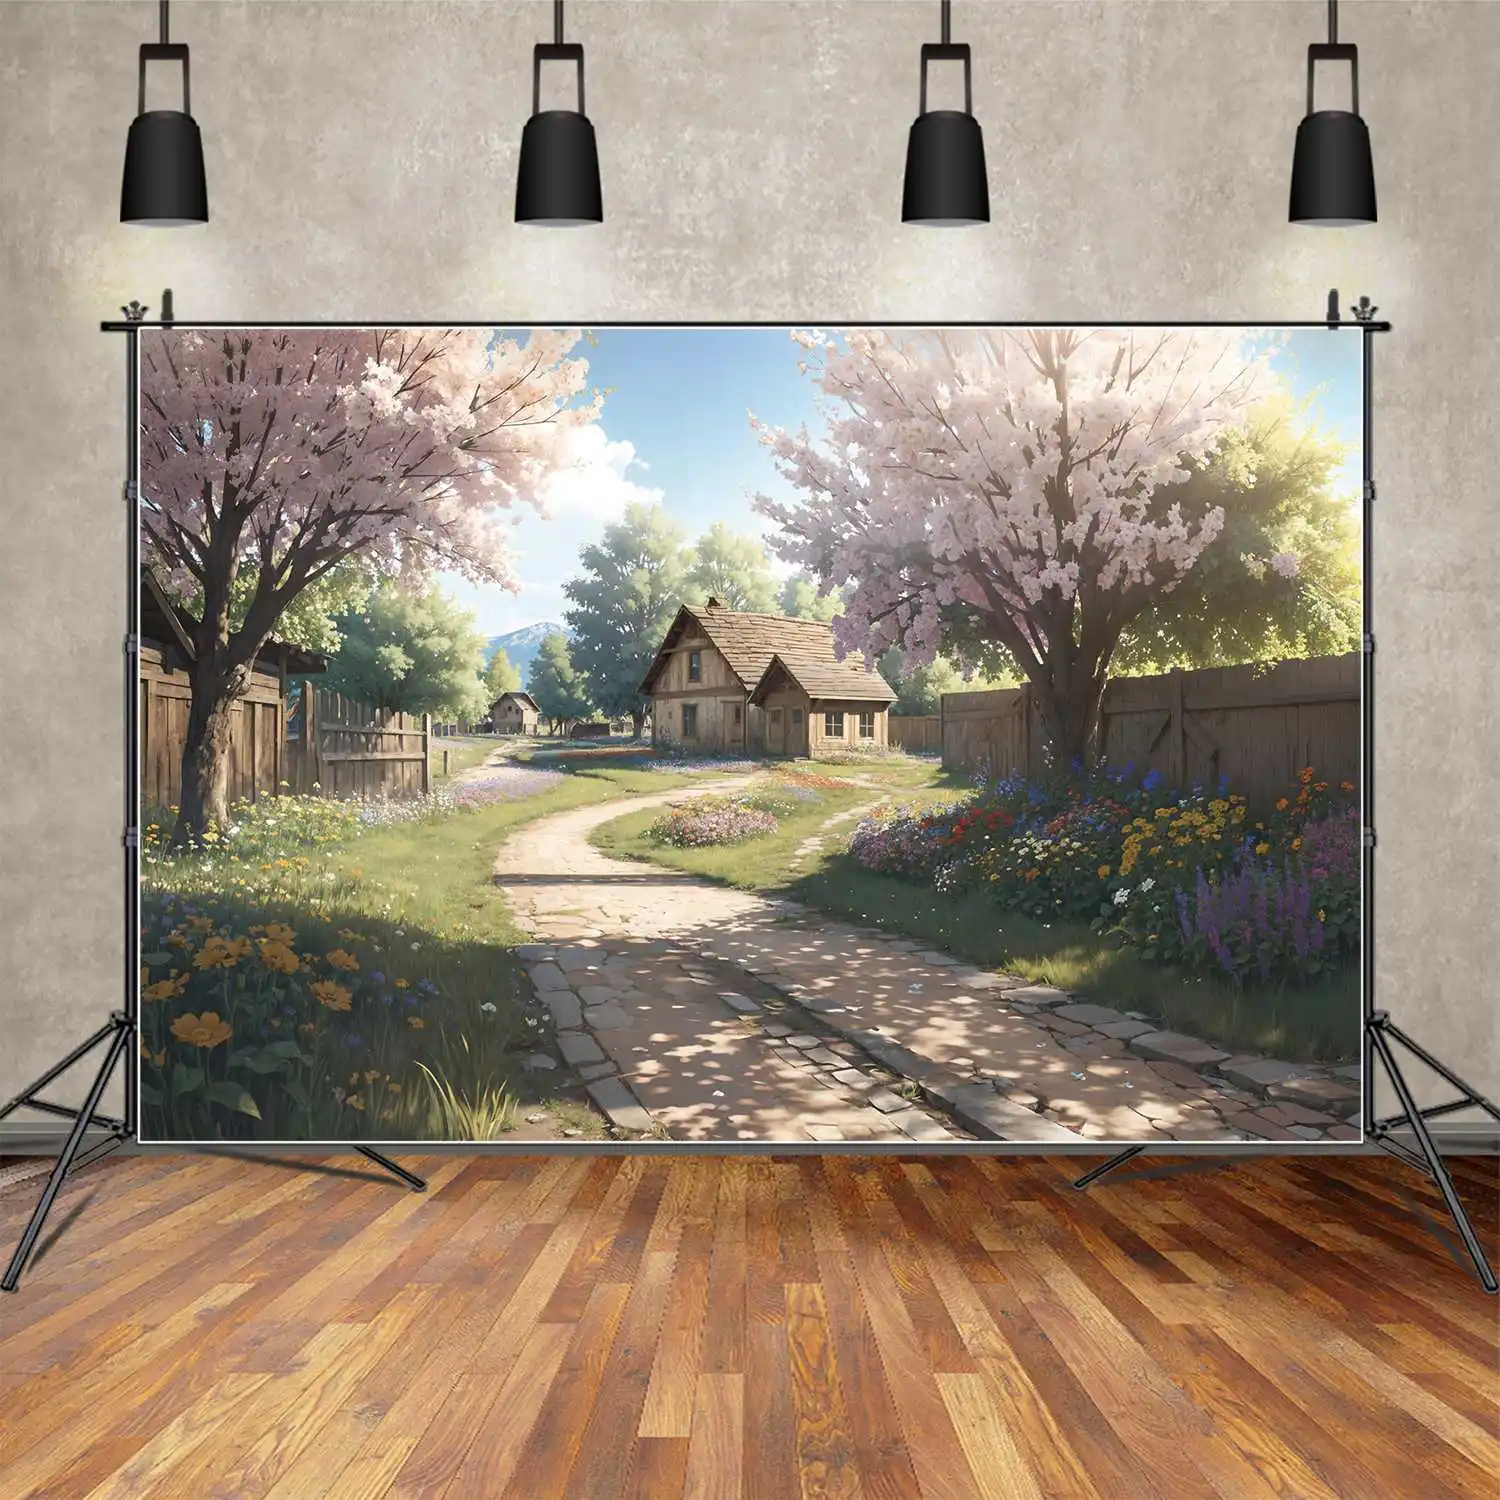 

Mountain Rural Home Backdrops Photography Decoration Spring Village Wood Customized Baby Photo Booth Photographic Backgrounds